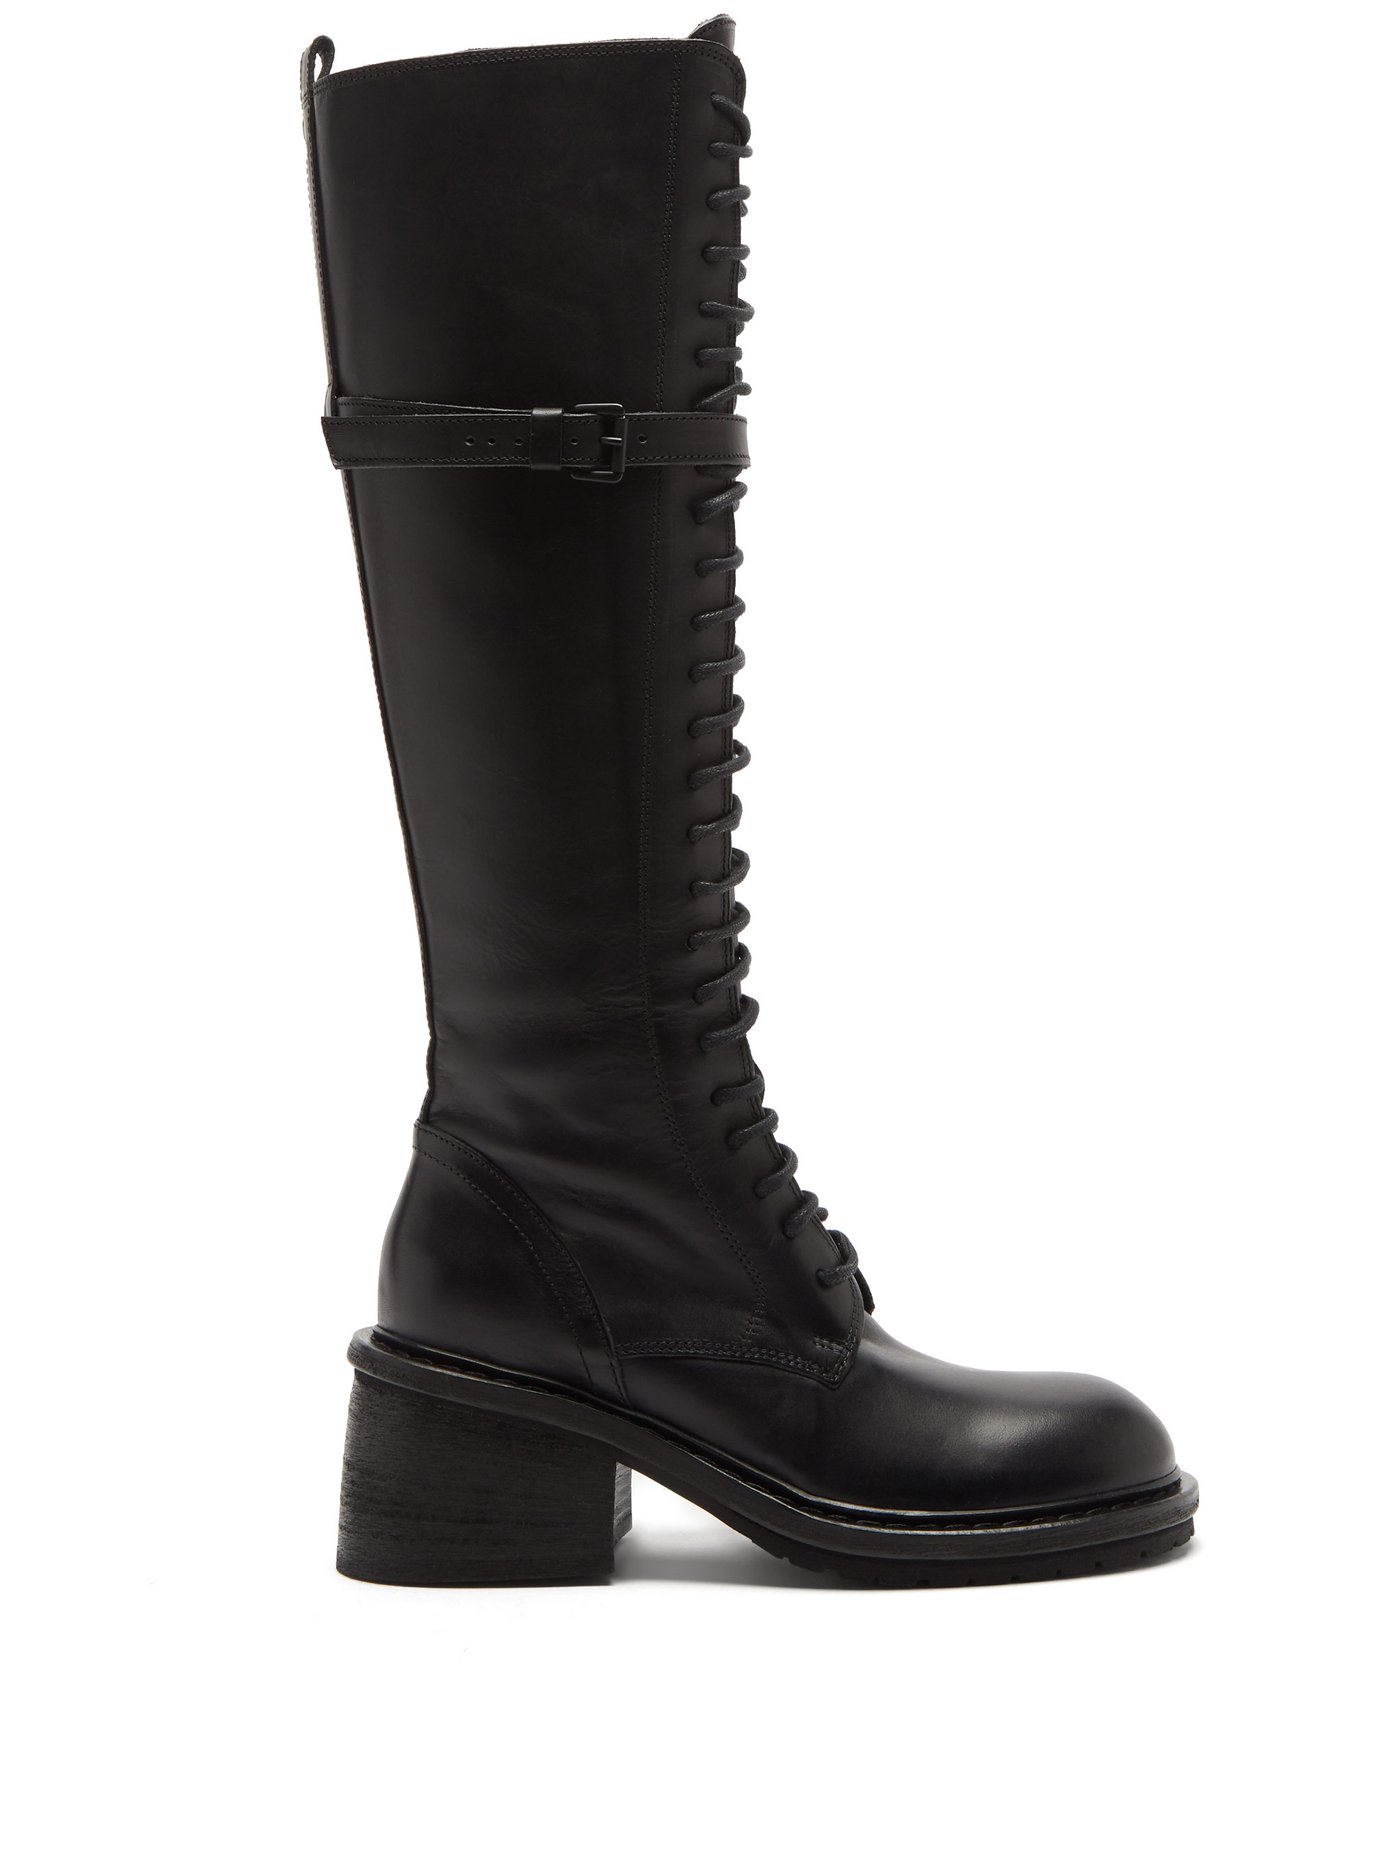 black leather lace up knee high boots